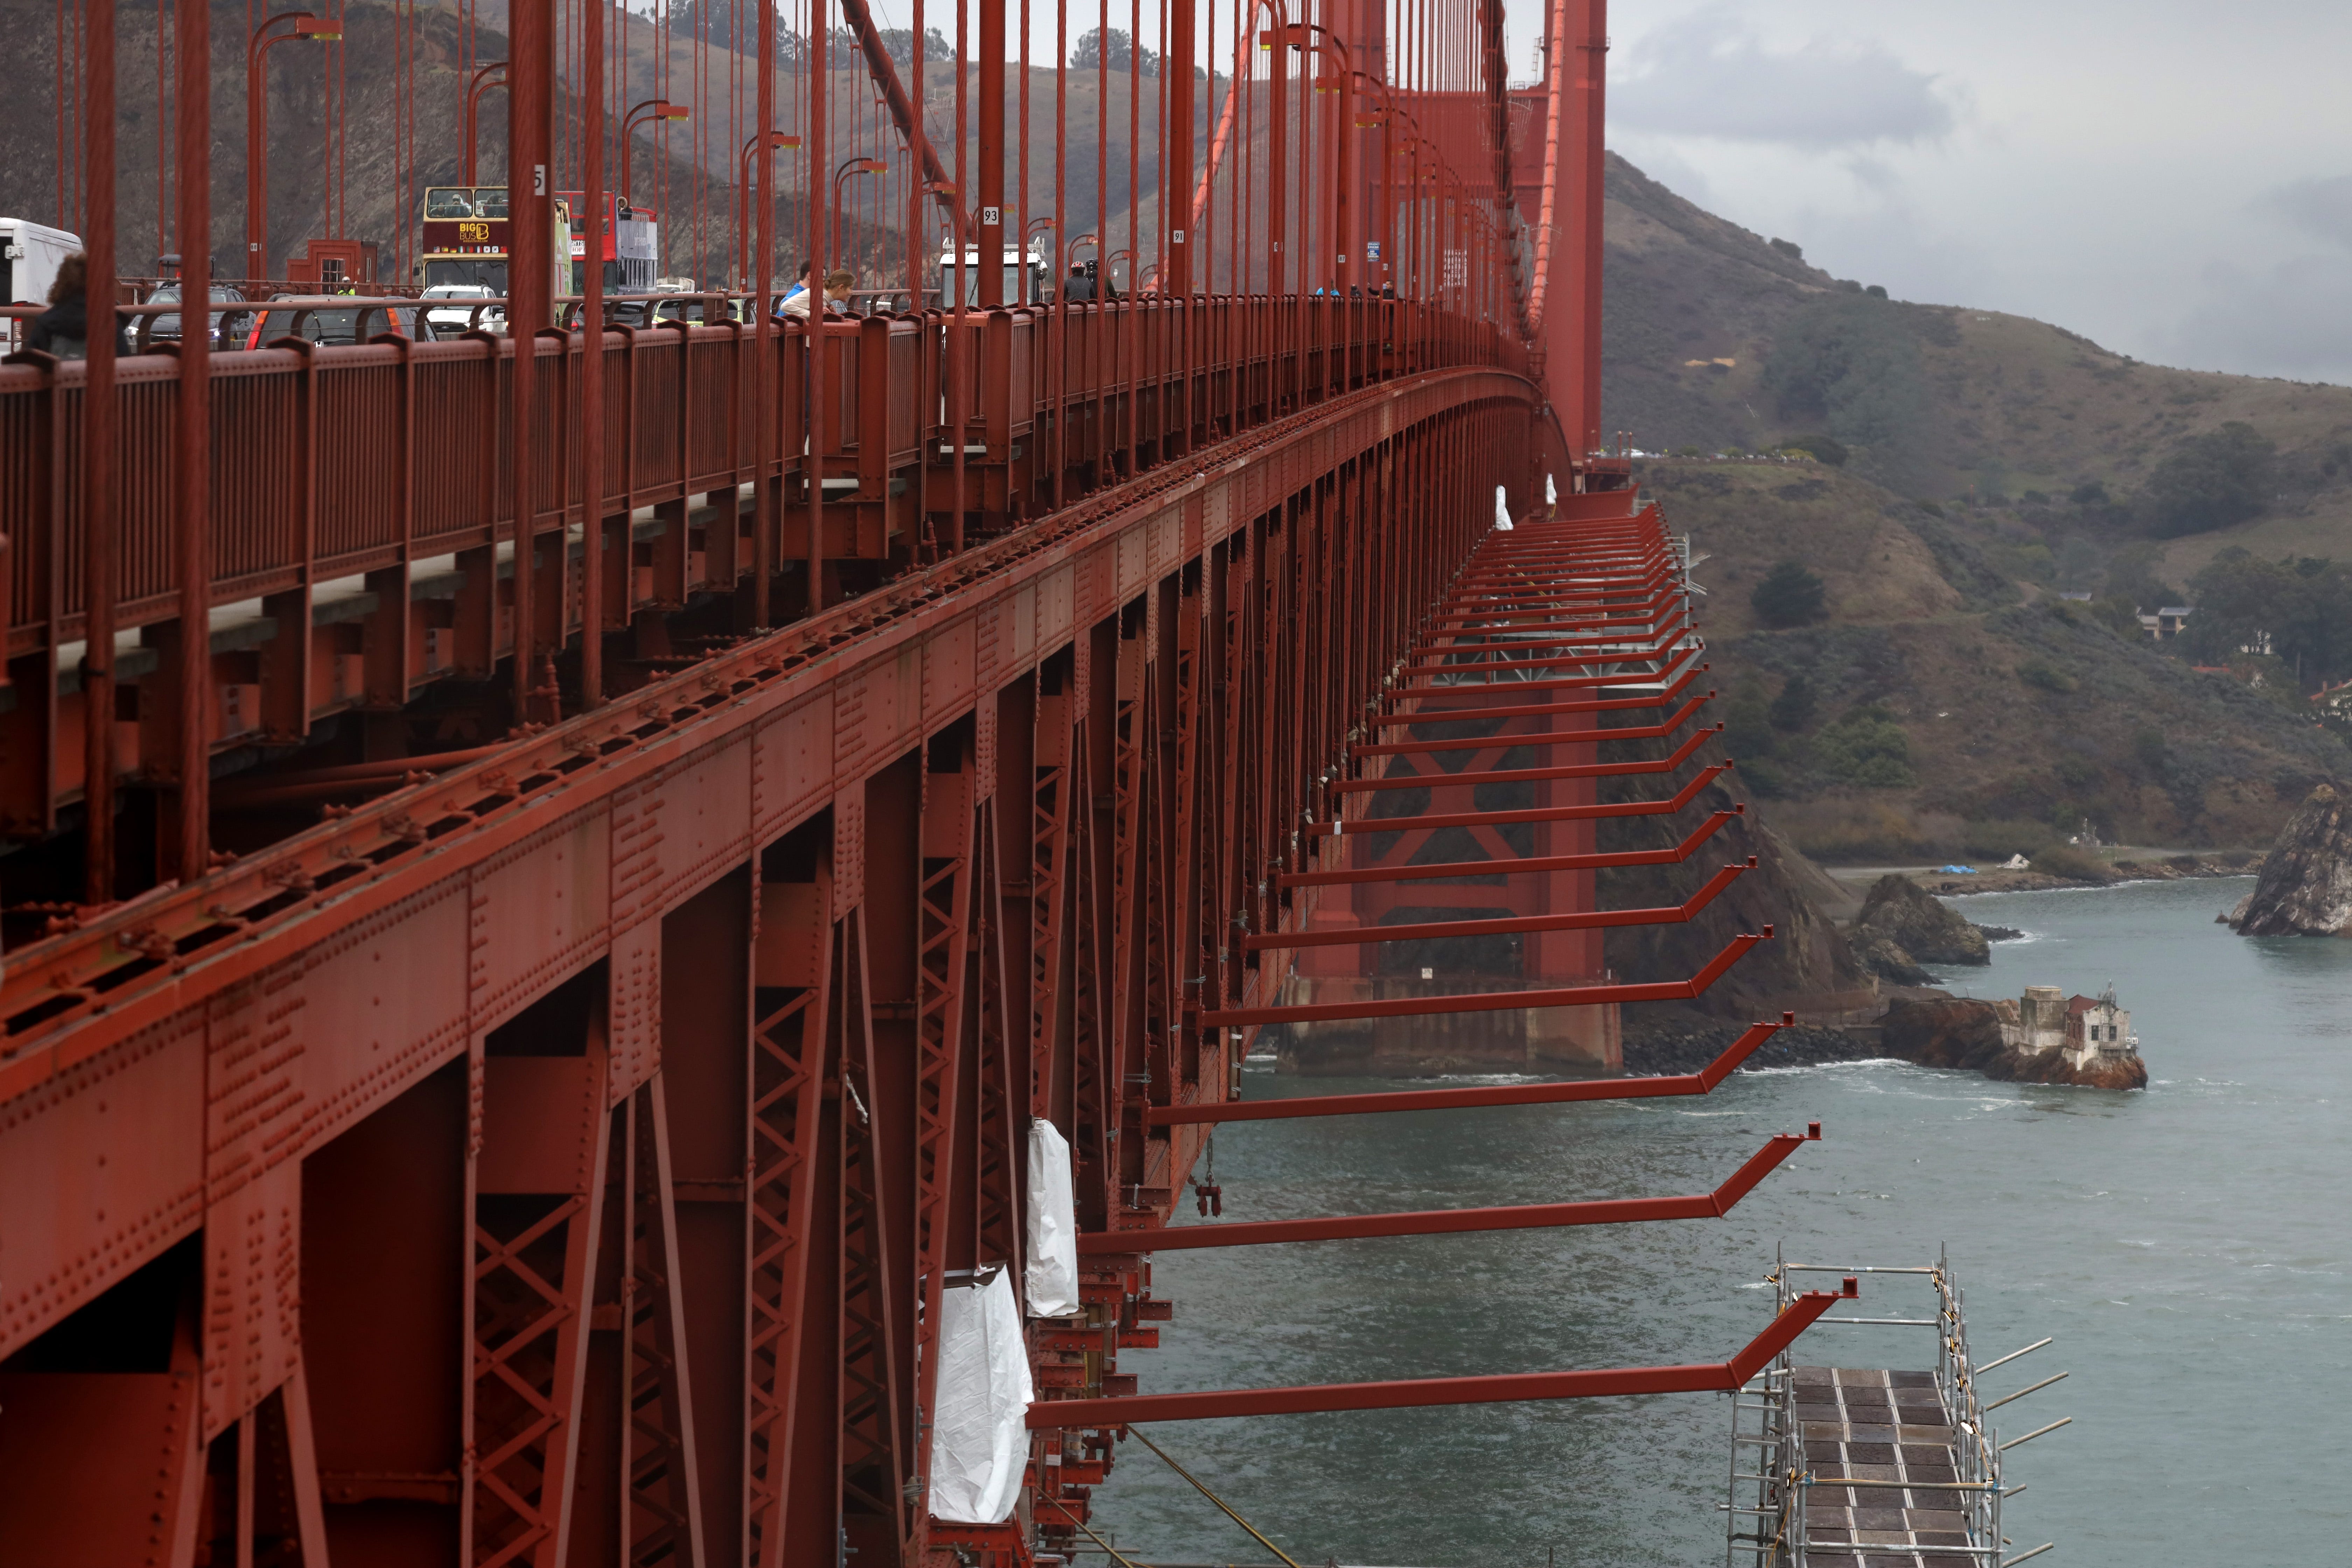 What We Get Wrong About the Golden Gate Bridge Suicides | by Emily Blaire |  The Bold Italic